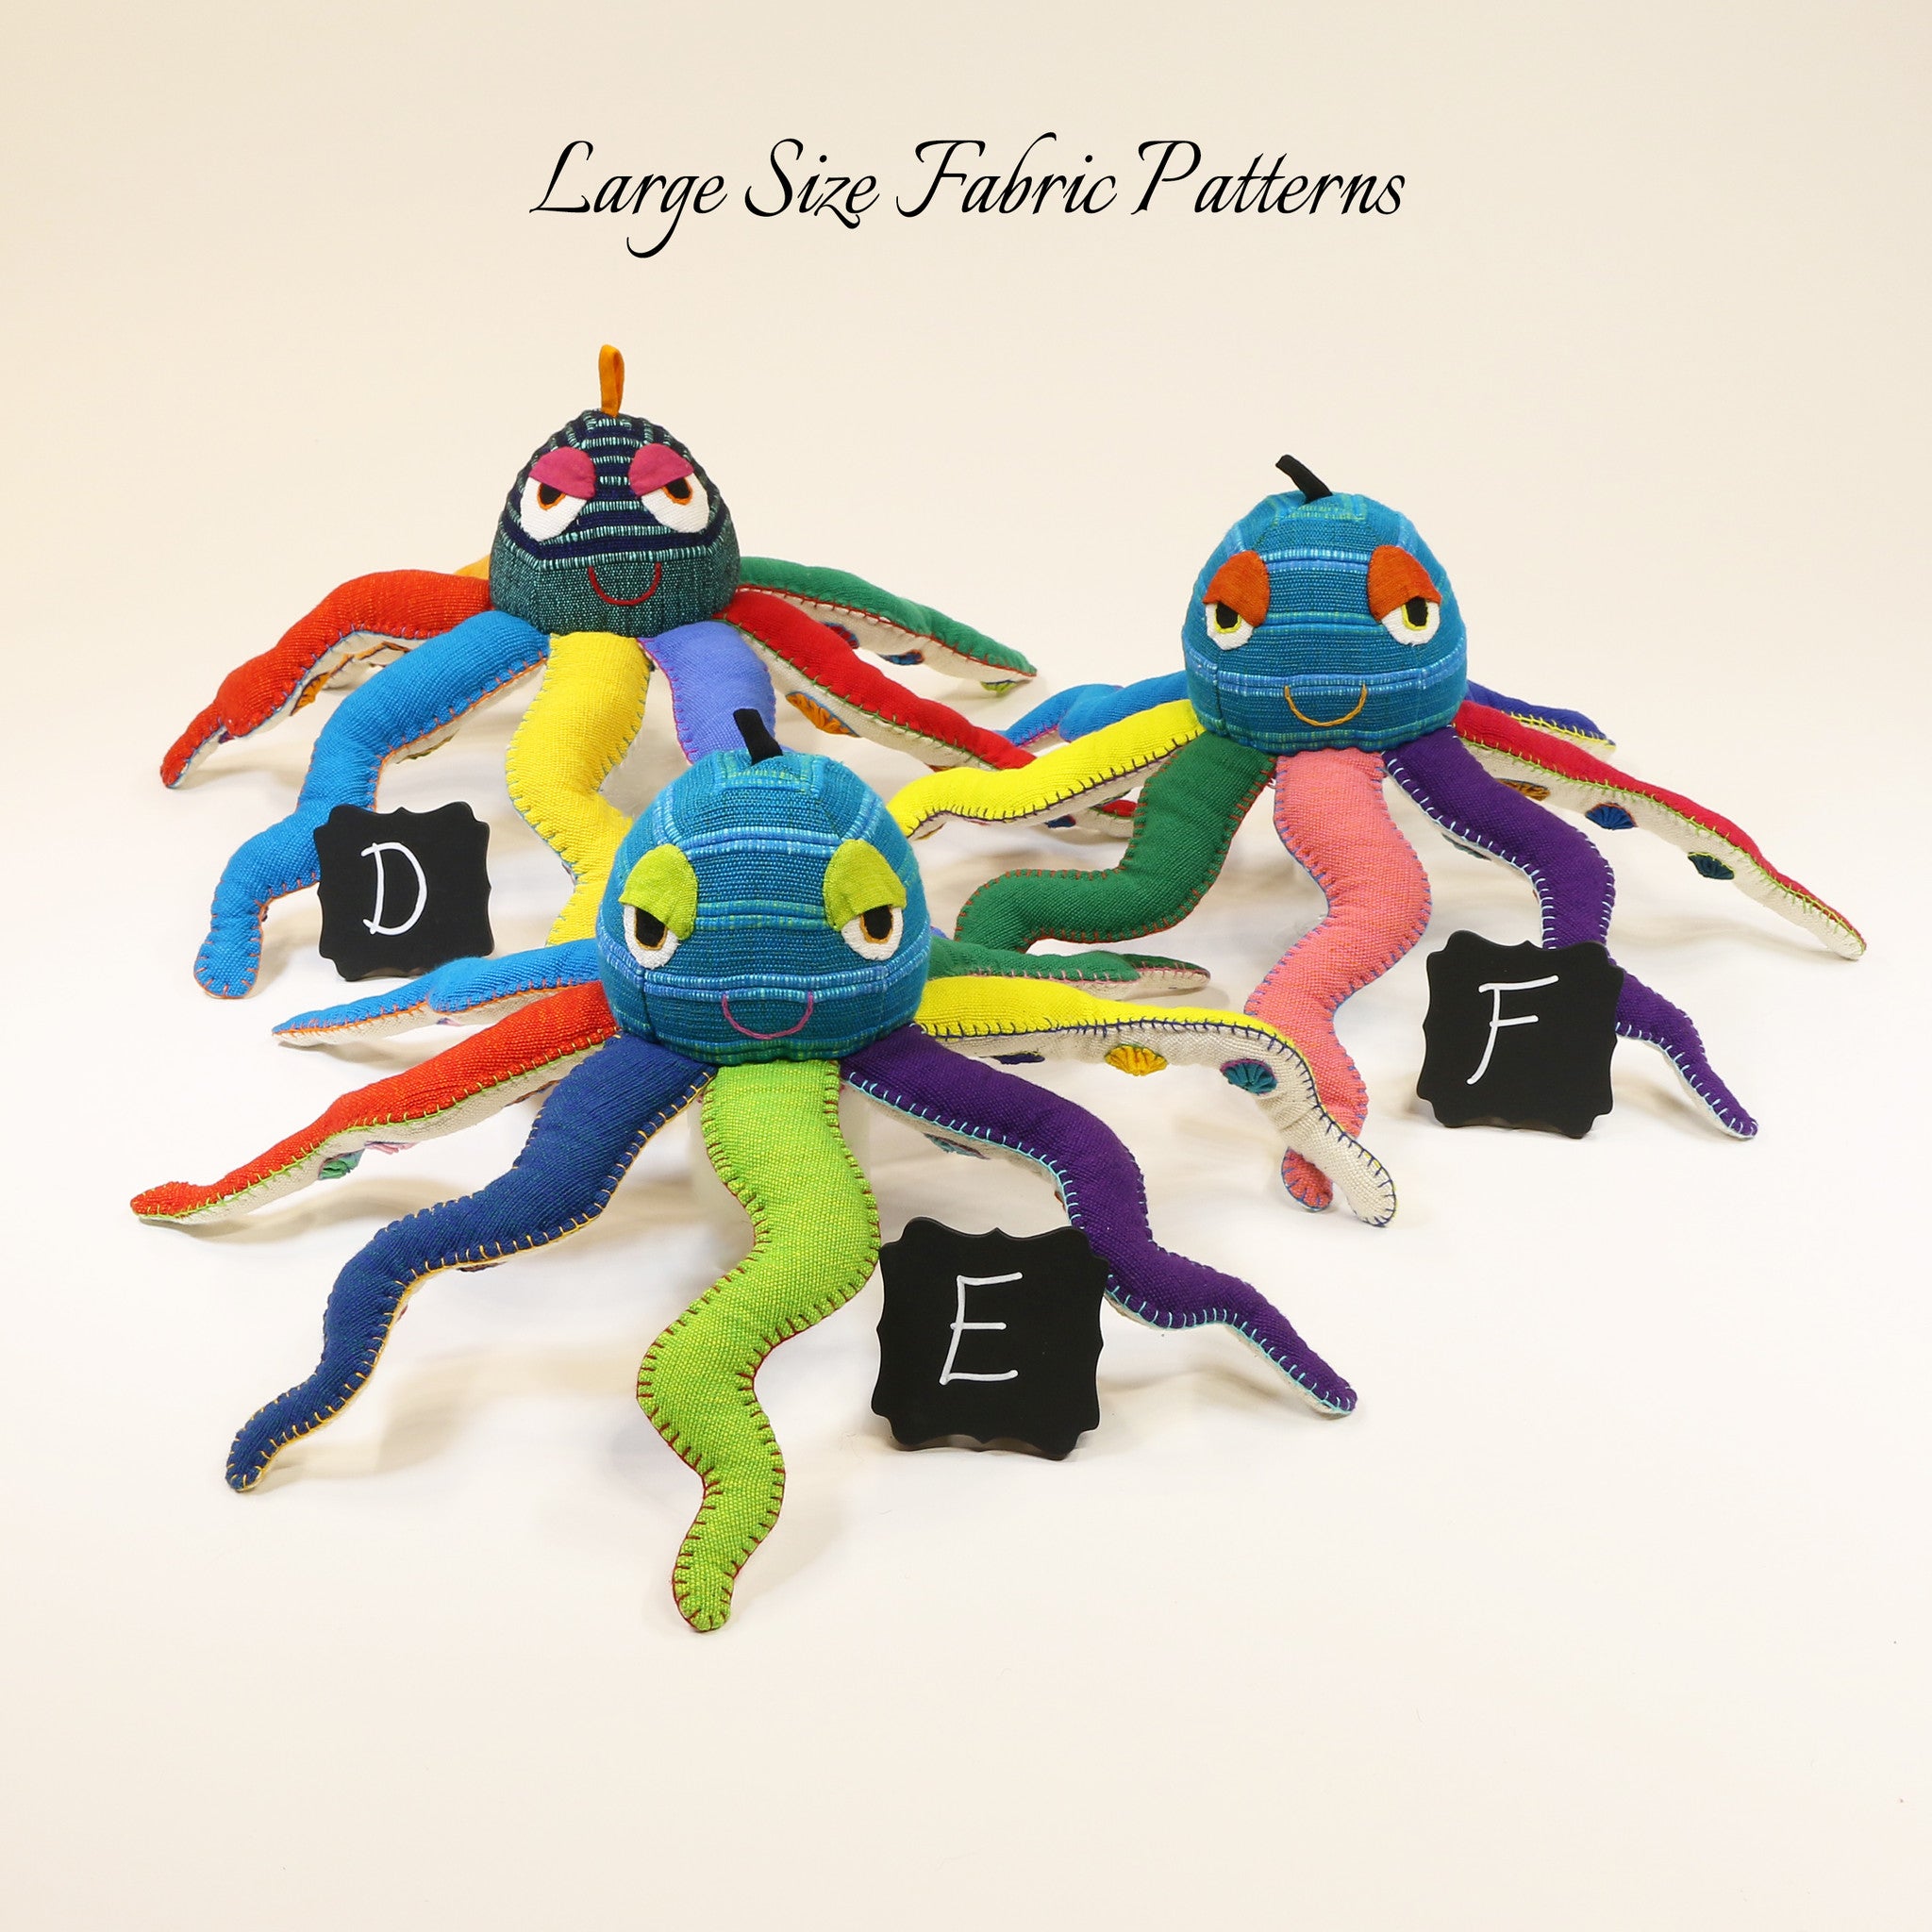 Owen, the Octopus – large size fabric patterns shown